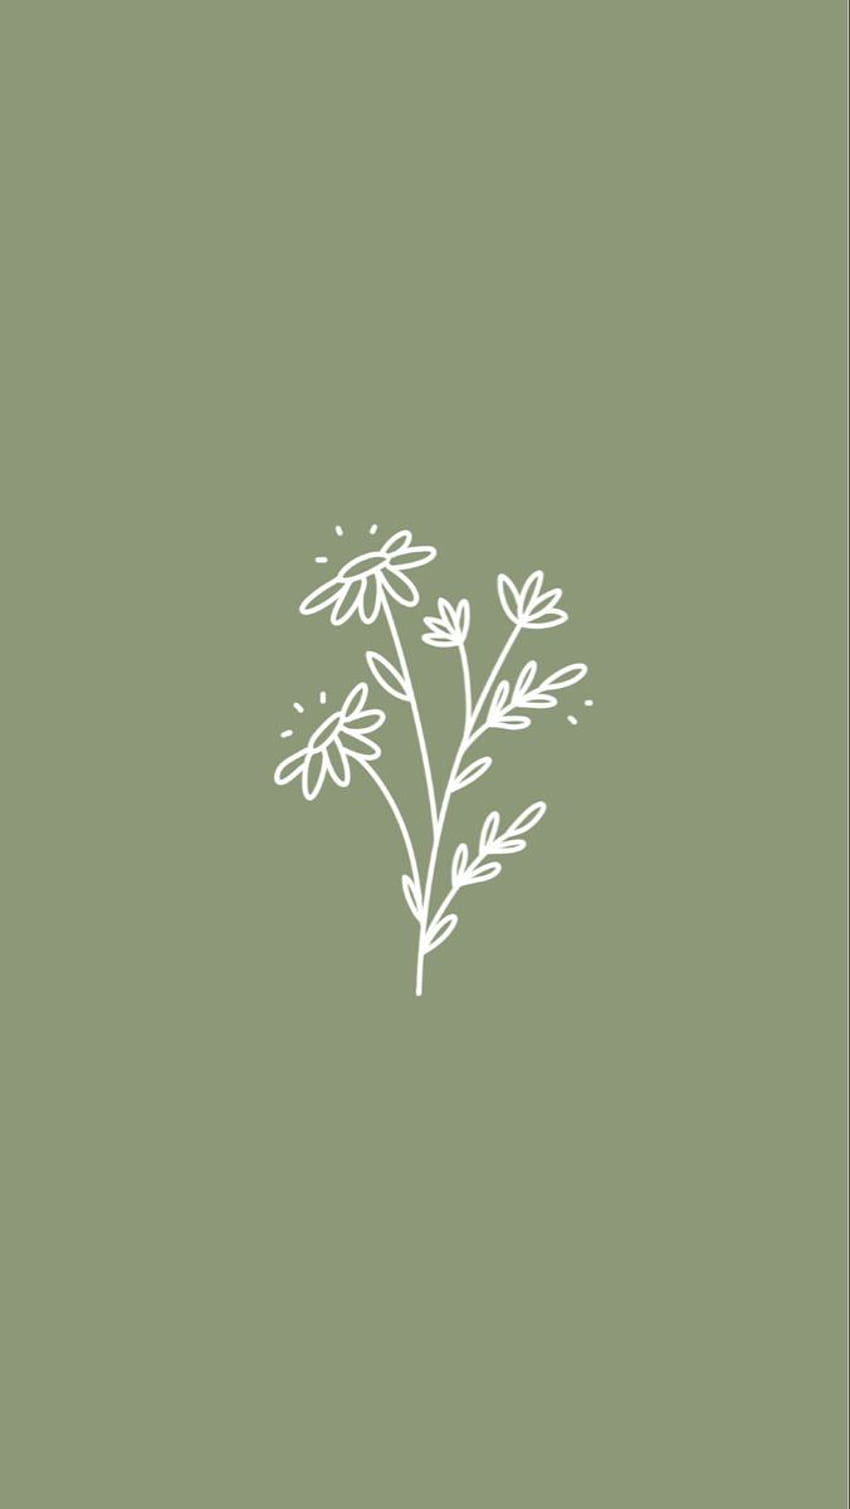 A simple logo design for the brand - Sage green